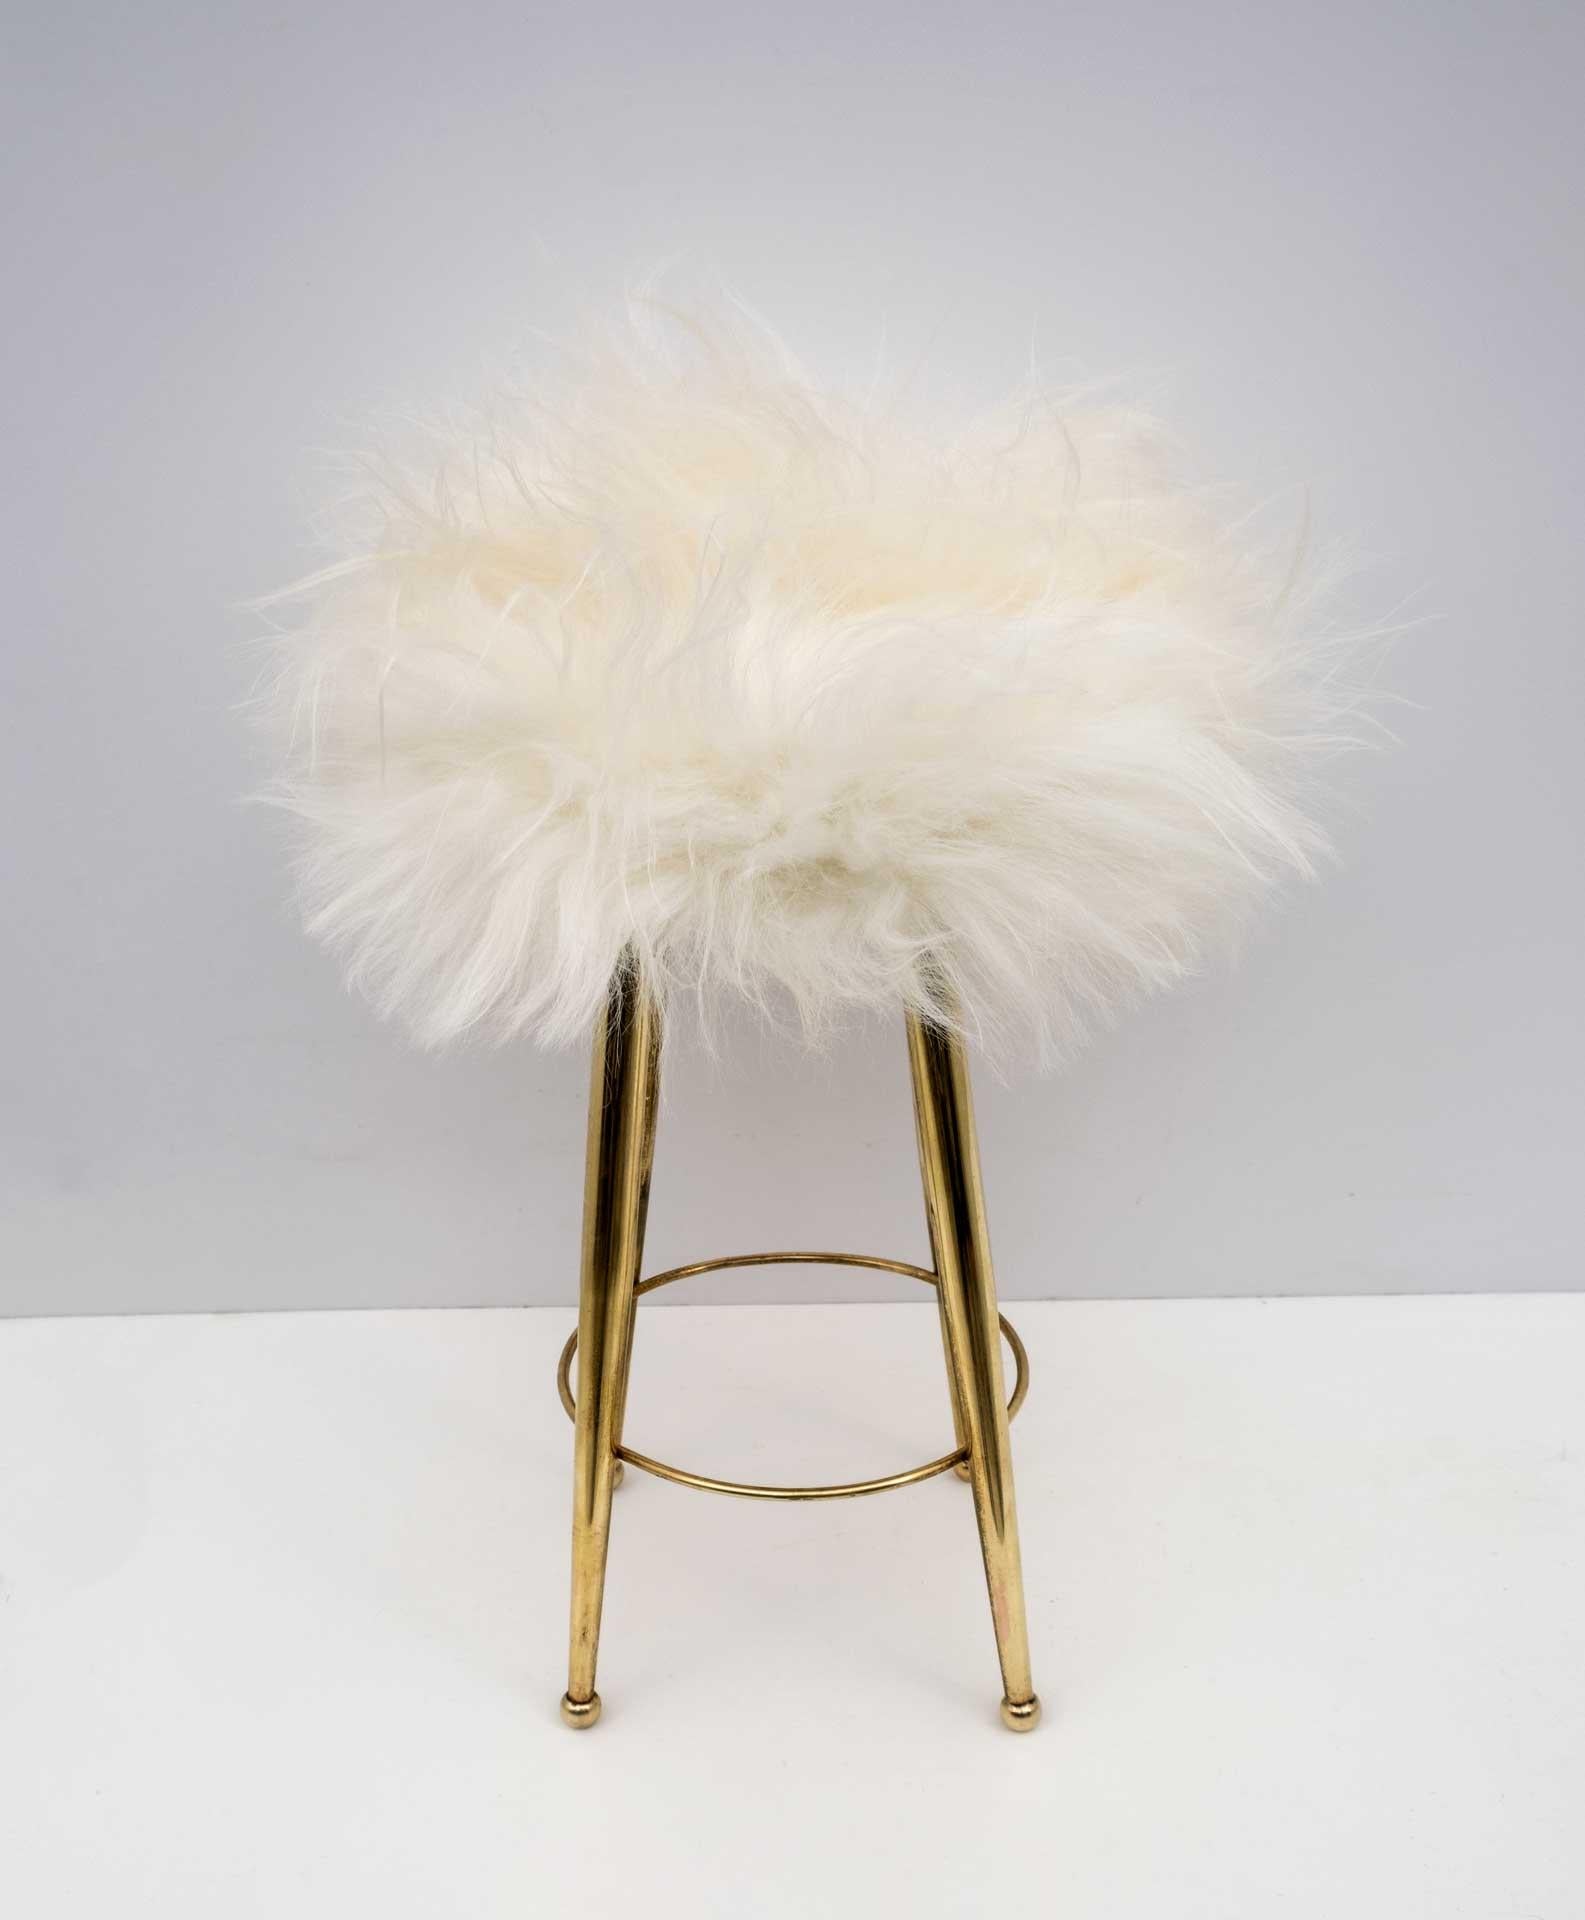 Small brass stool designed by Gio Ponti in the 1950s. Polished and upholstered in goatskin.